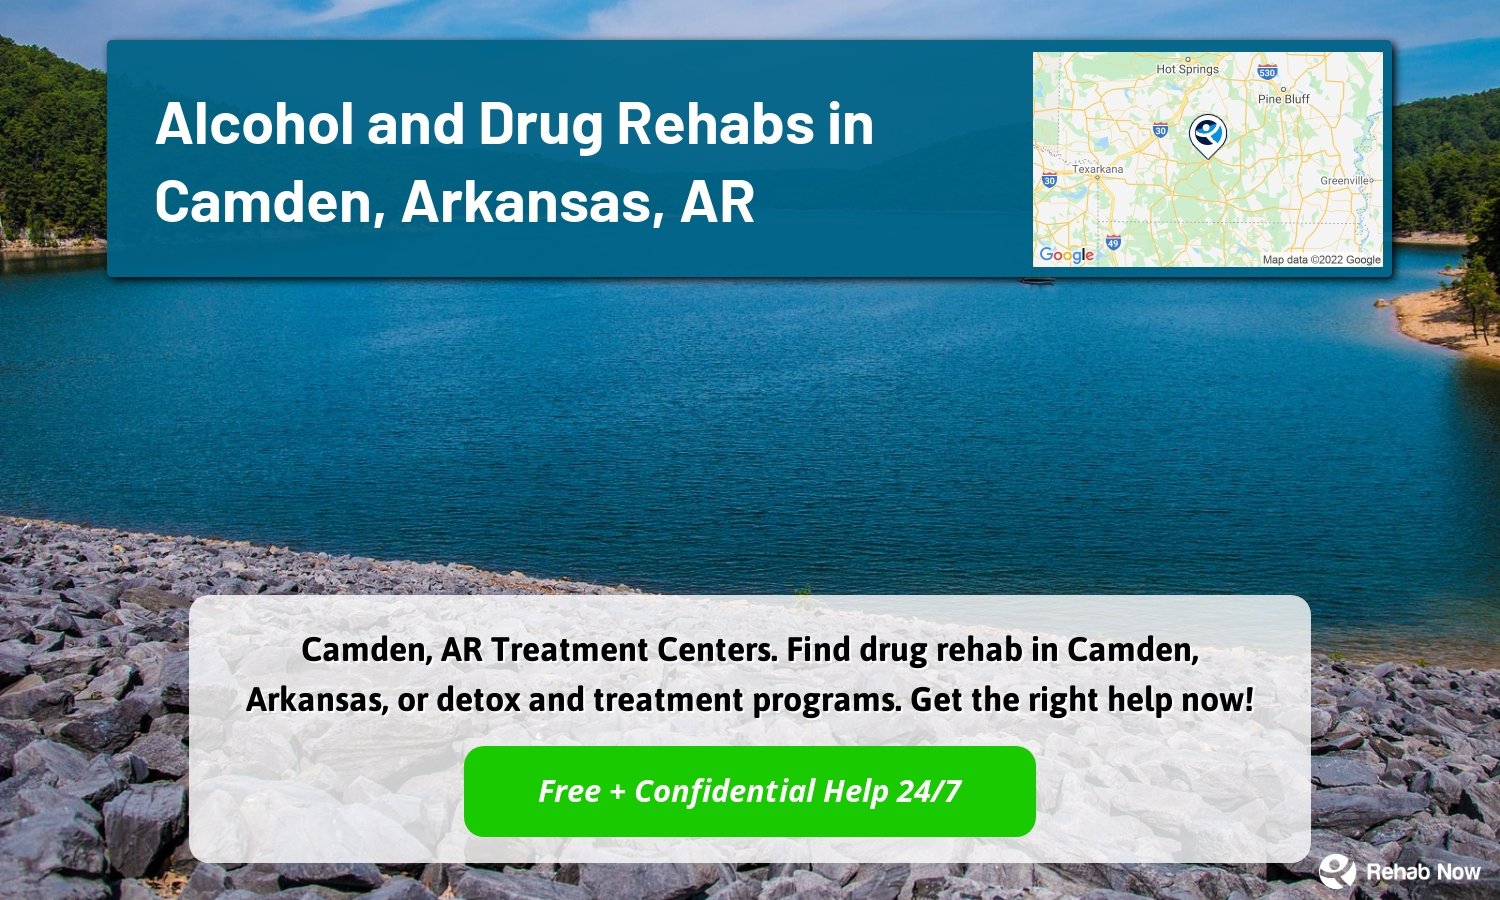 Camden, AR Treatment Centers. Find drug rehab in Camden, Arkansas, or detox and treatment programs. Get the right help now!